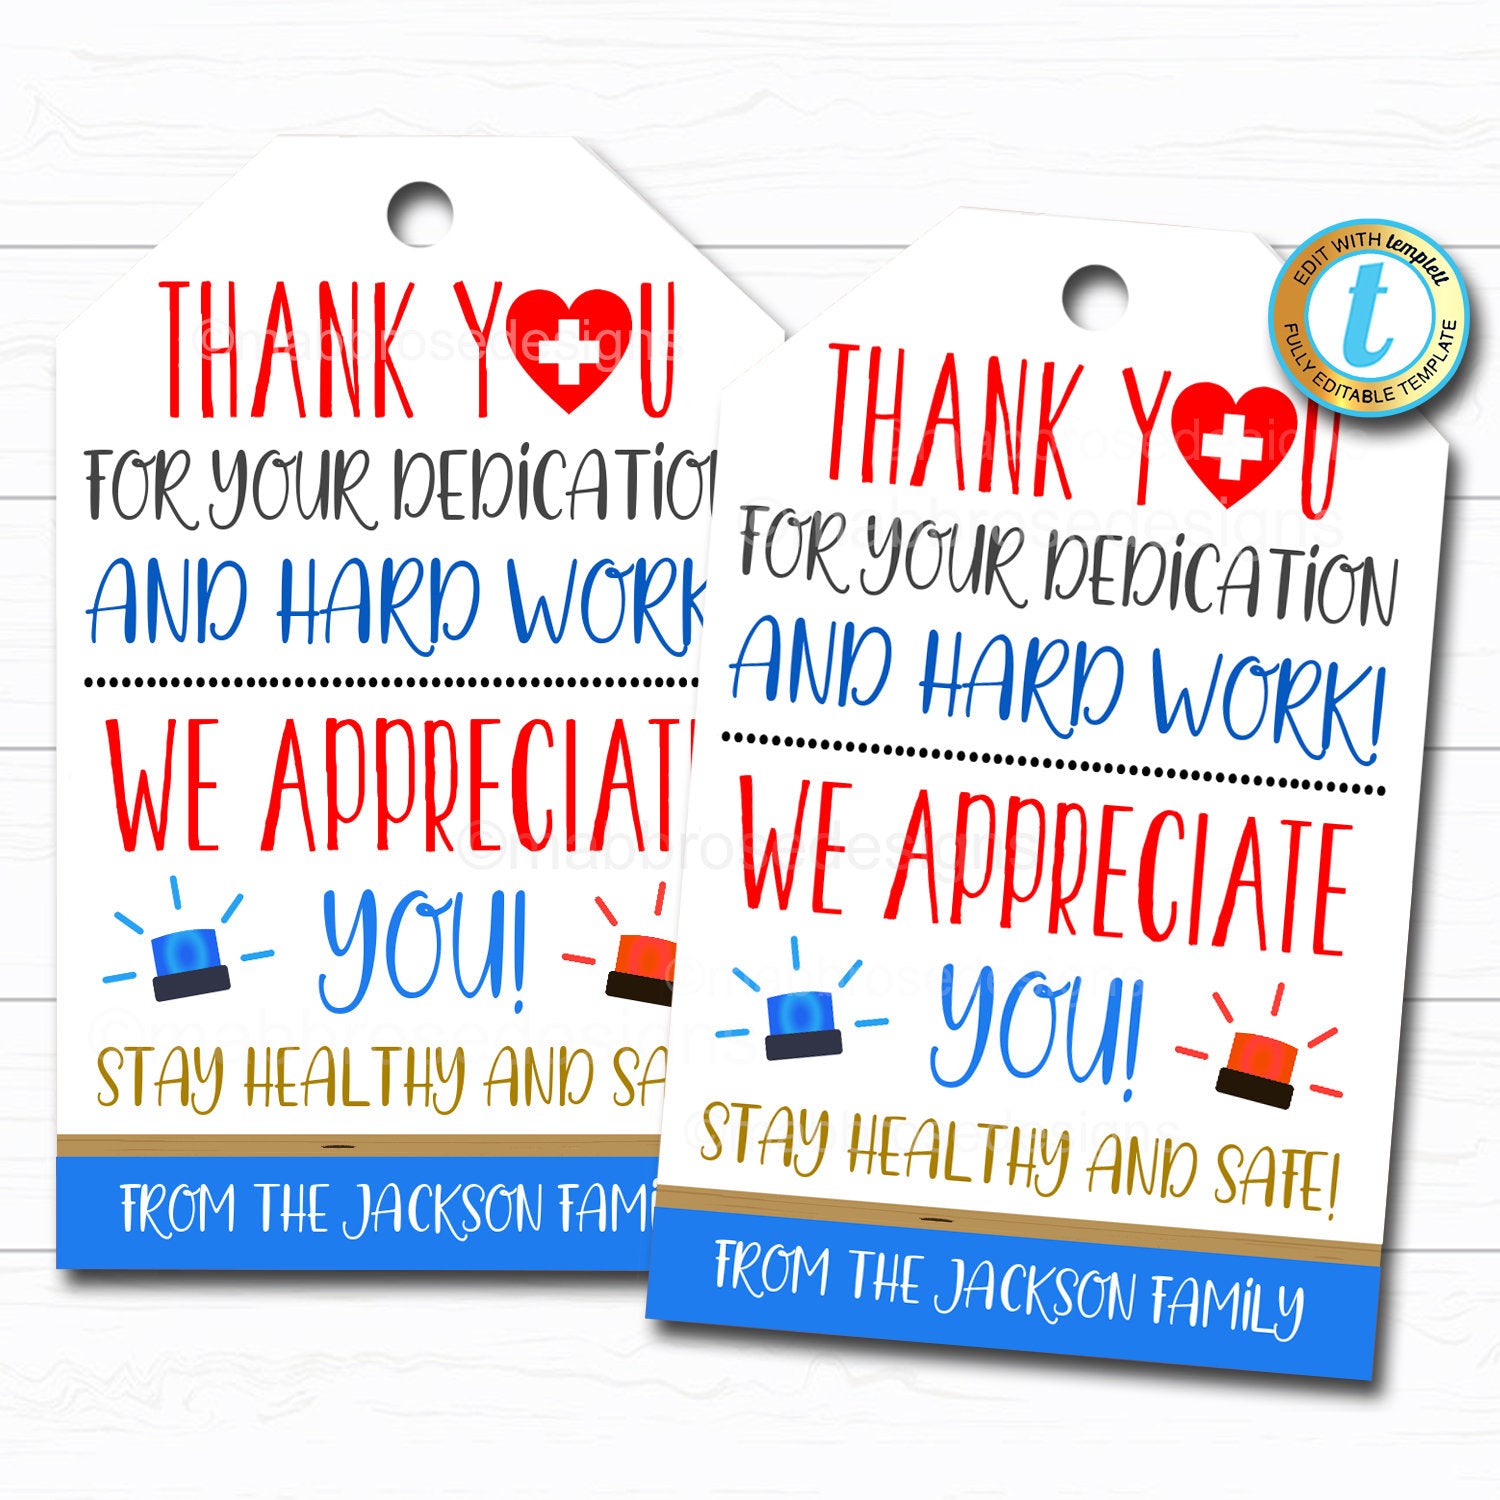 Employee Appreciation Day Flyer Template Collection